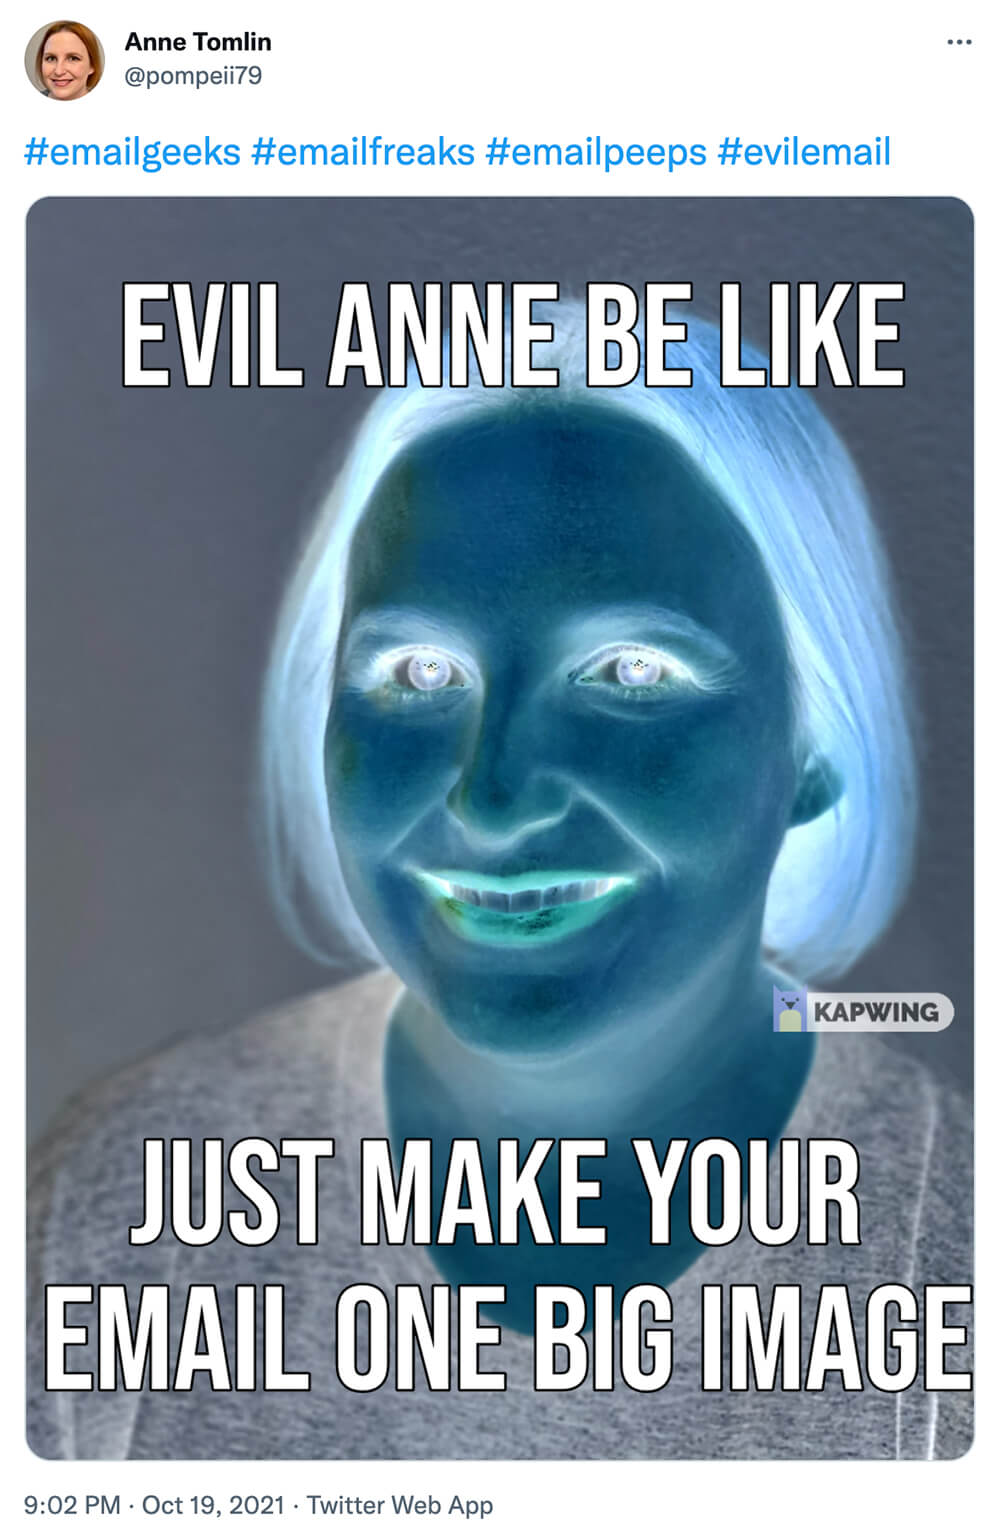 @pompeii79 on twitter: inverted image of Anne Tomlin with the text Evil Anne be like just make your email one big image over top of the image